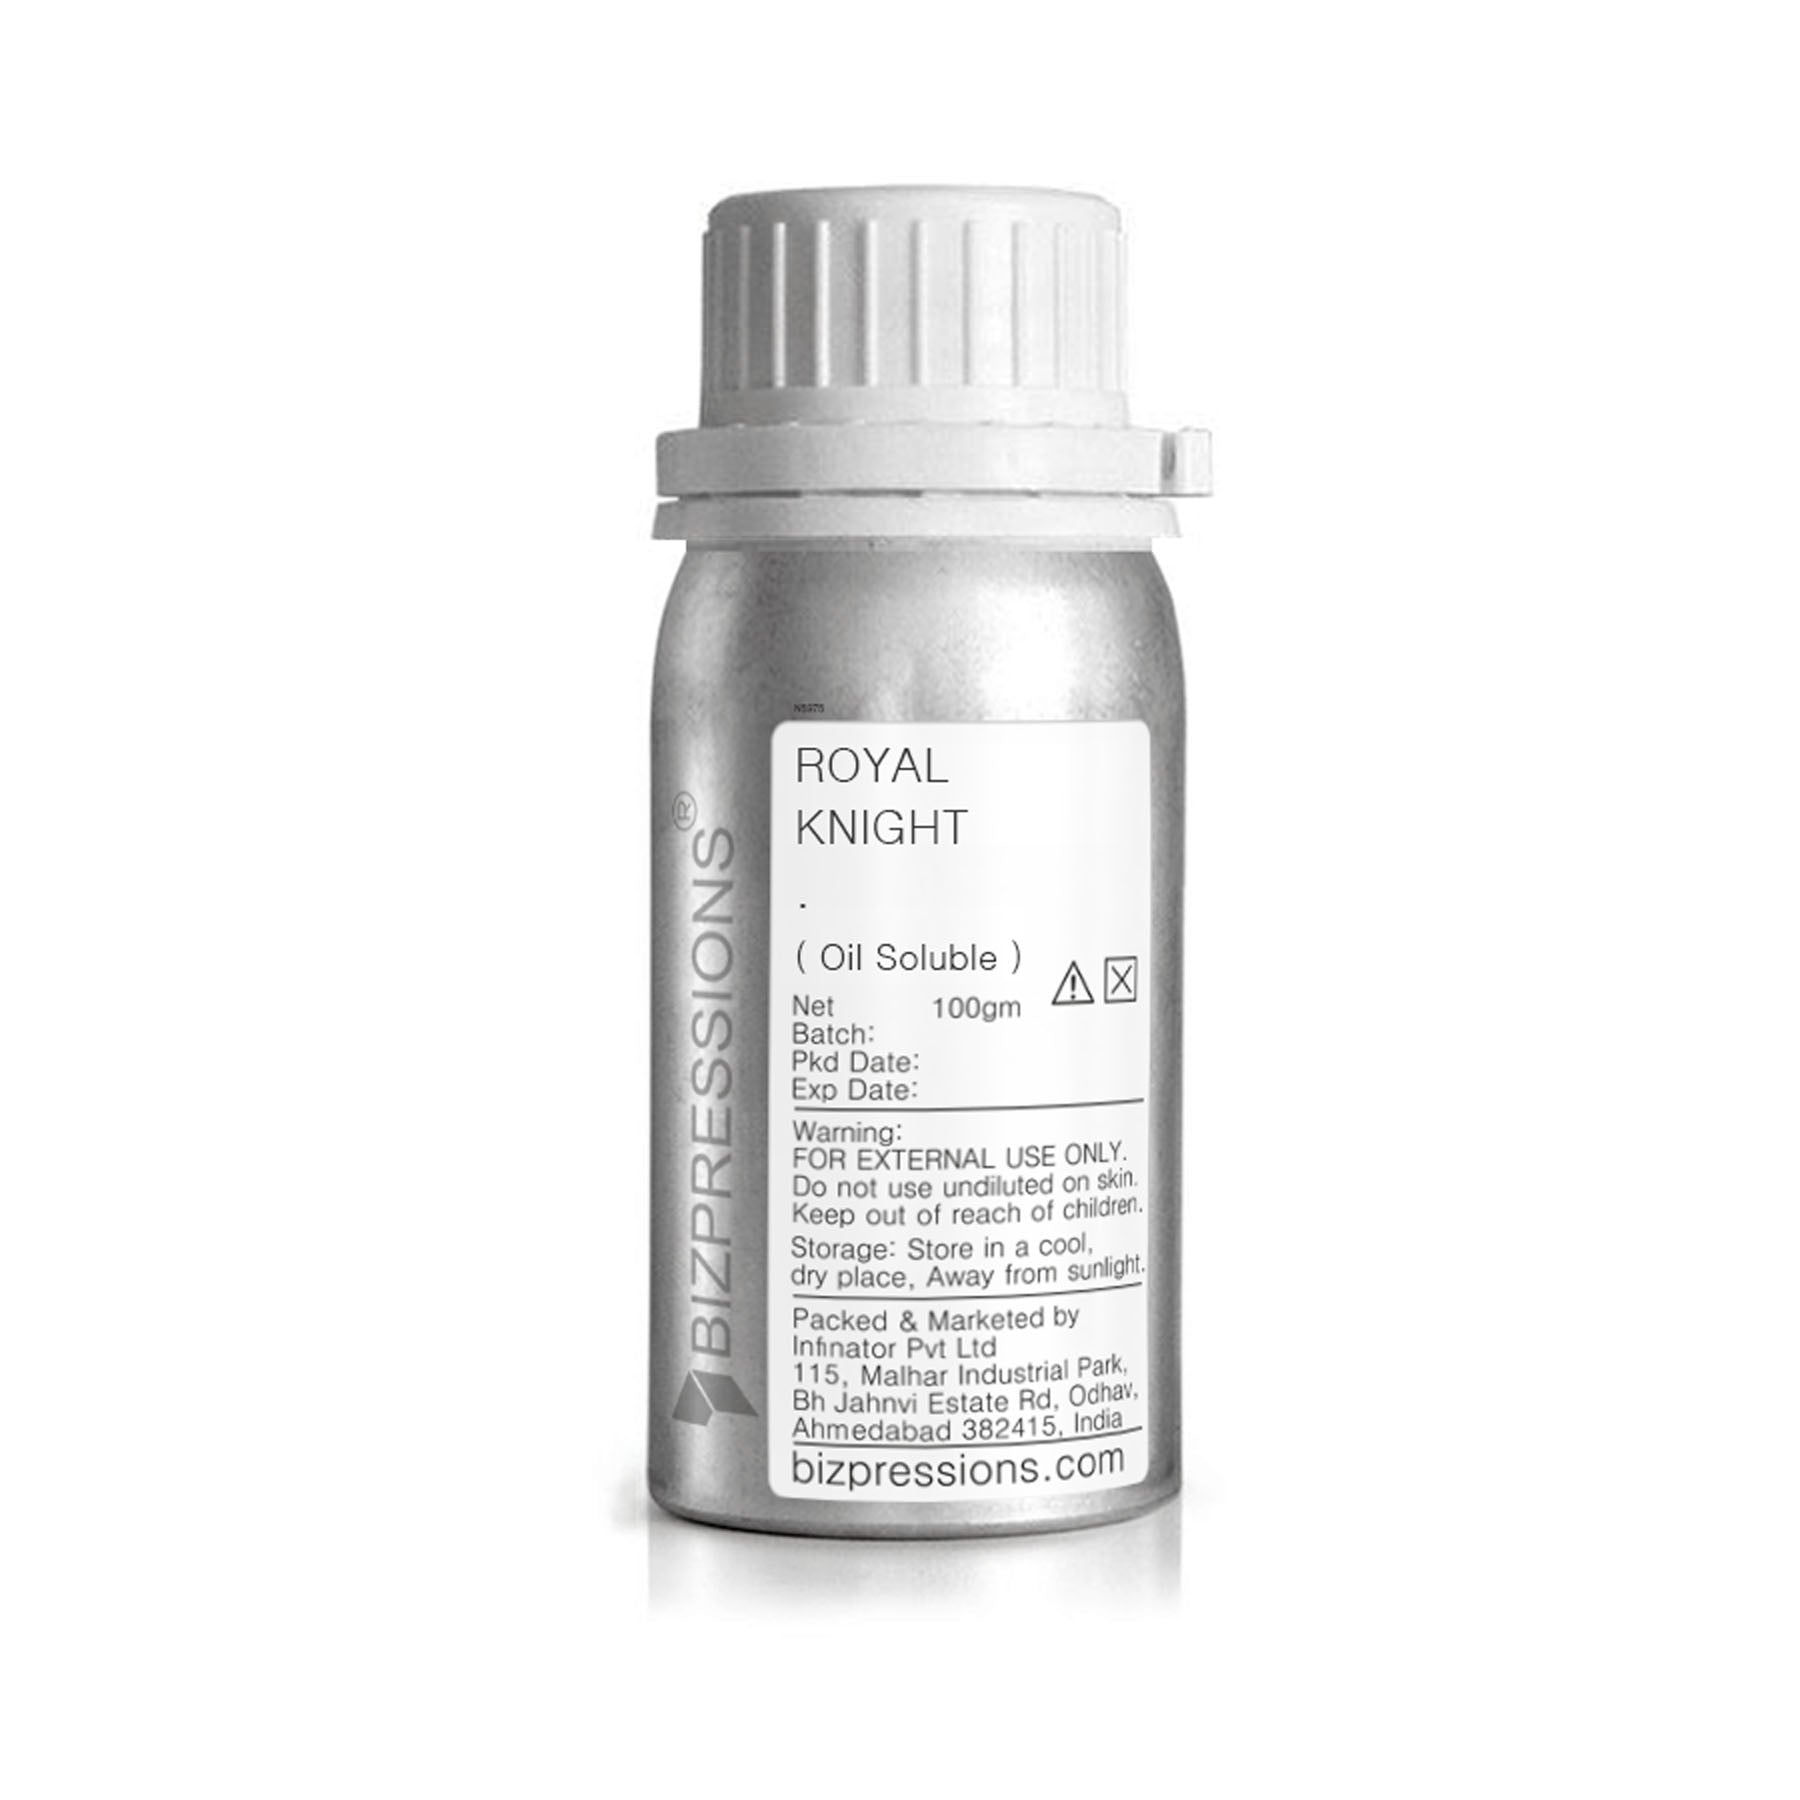 ROYAL KNIGHT - Fragrance ( Oil Soluble ) - 100 gm